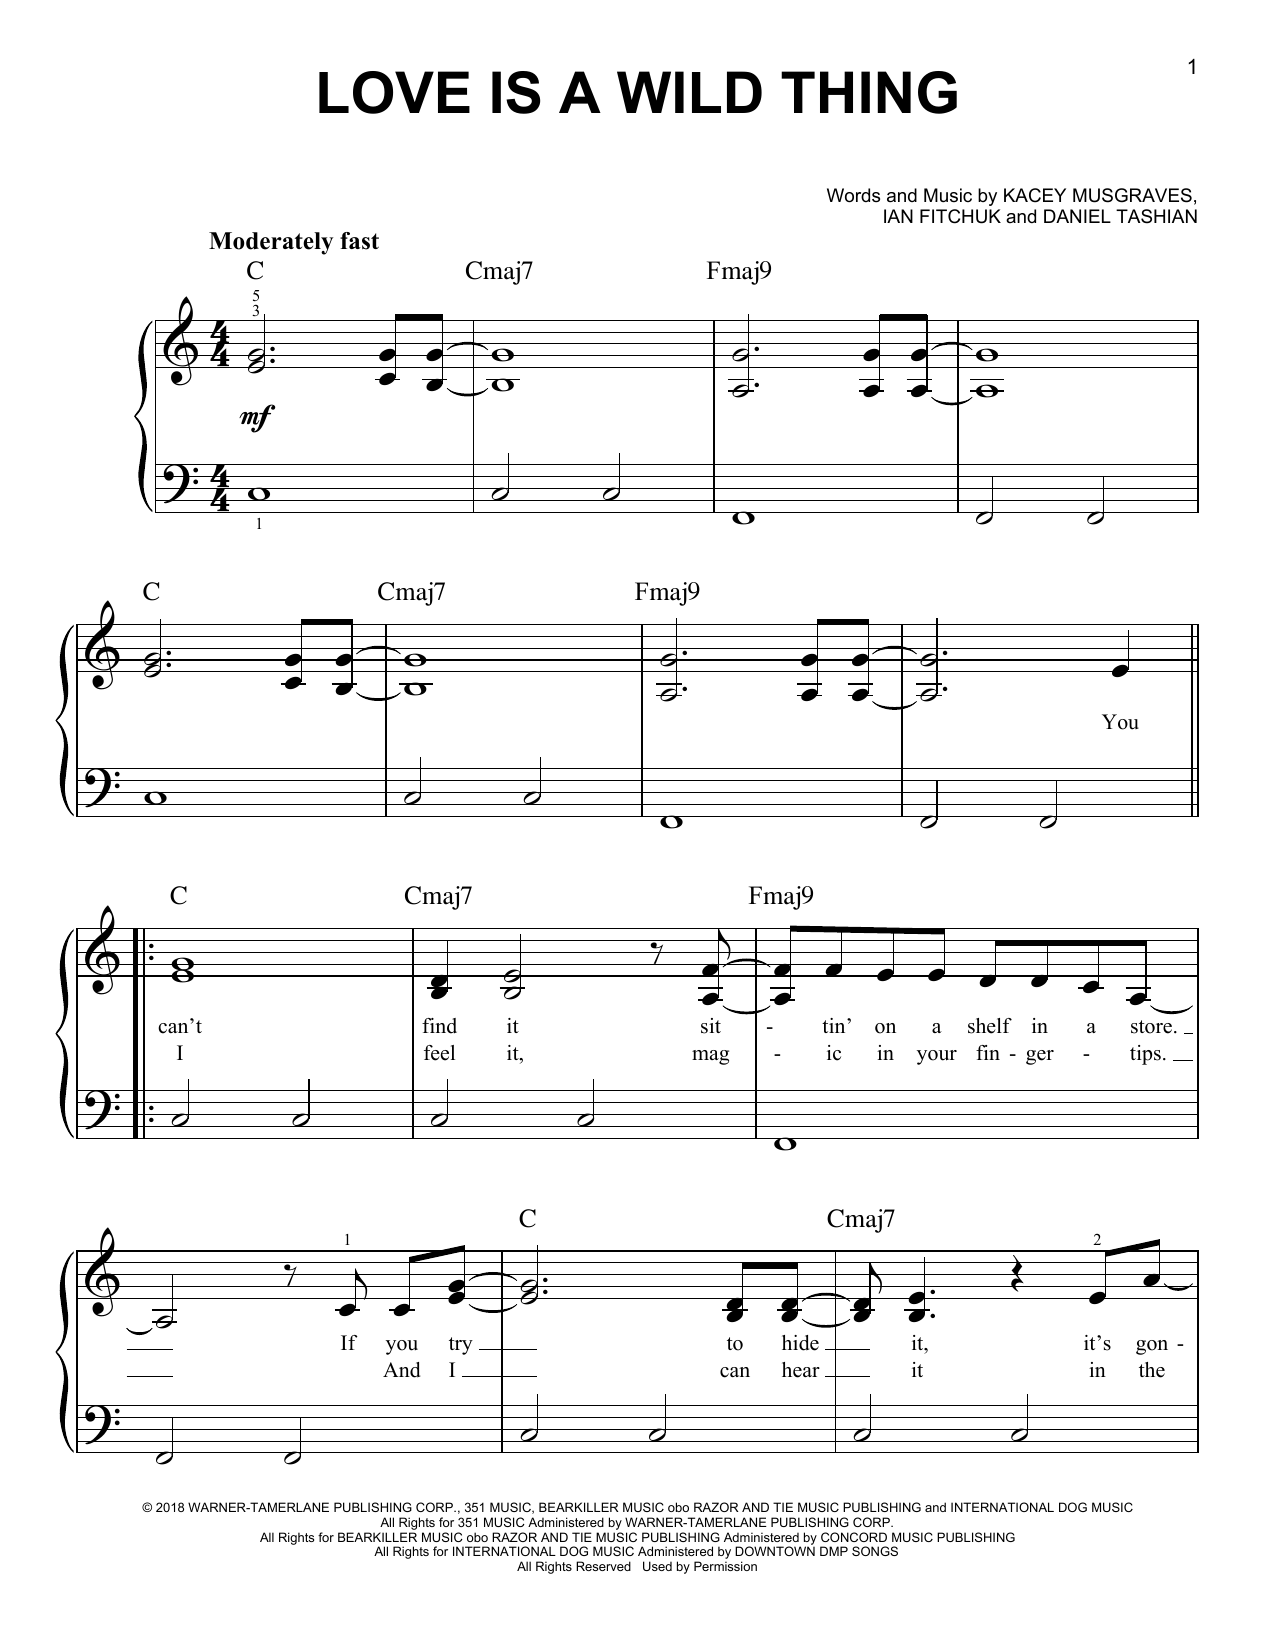 Download Kacey Musgraves Love Is A Wild Thing Sheet Music